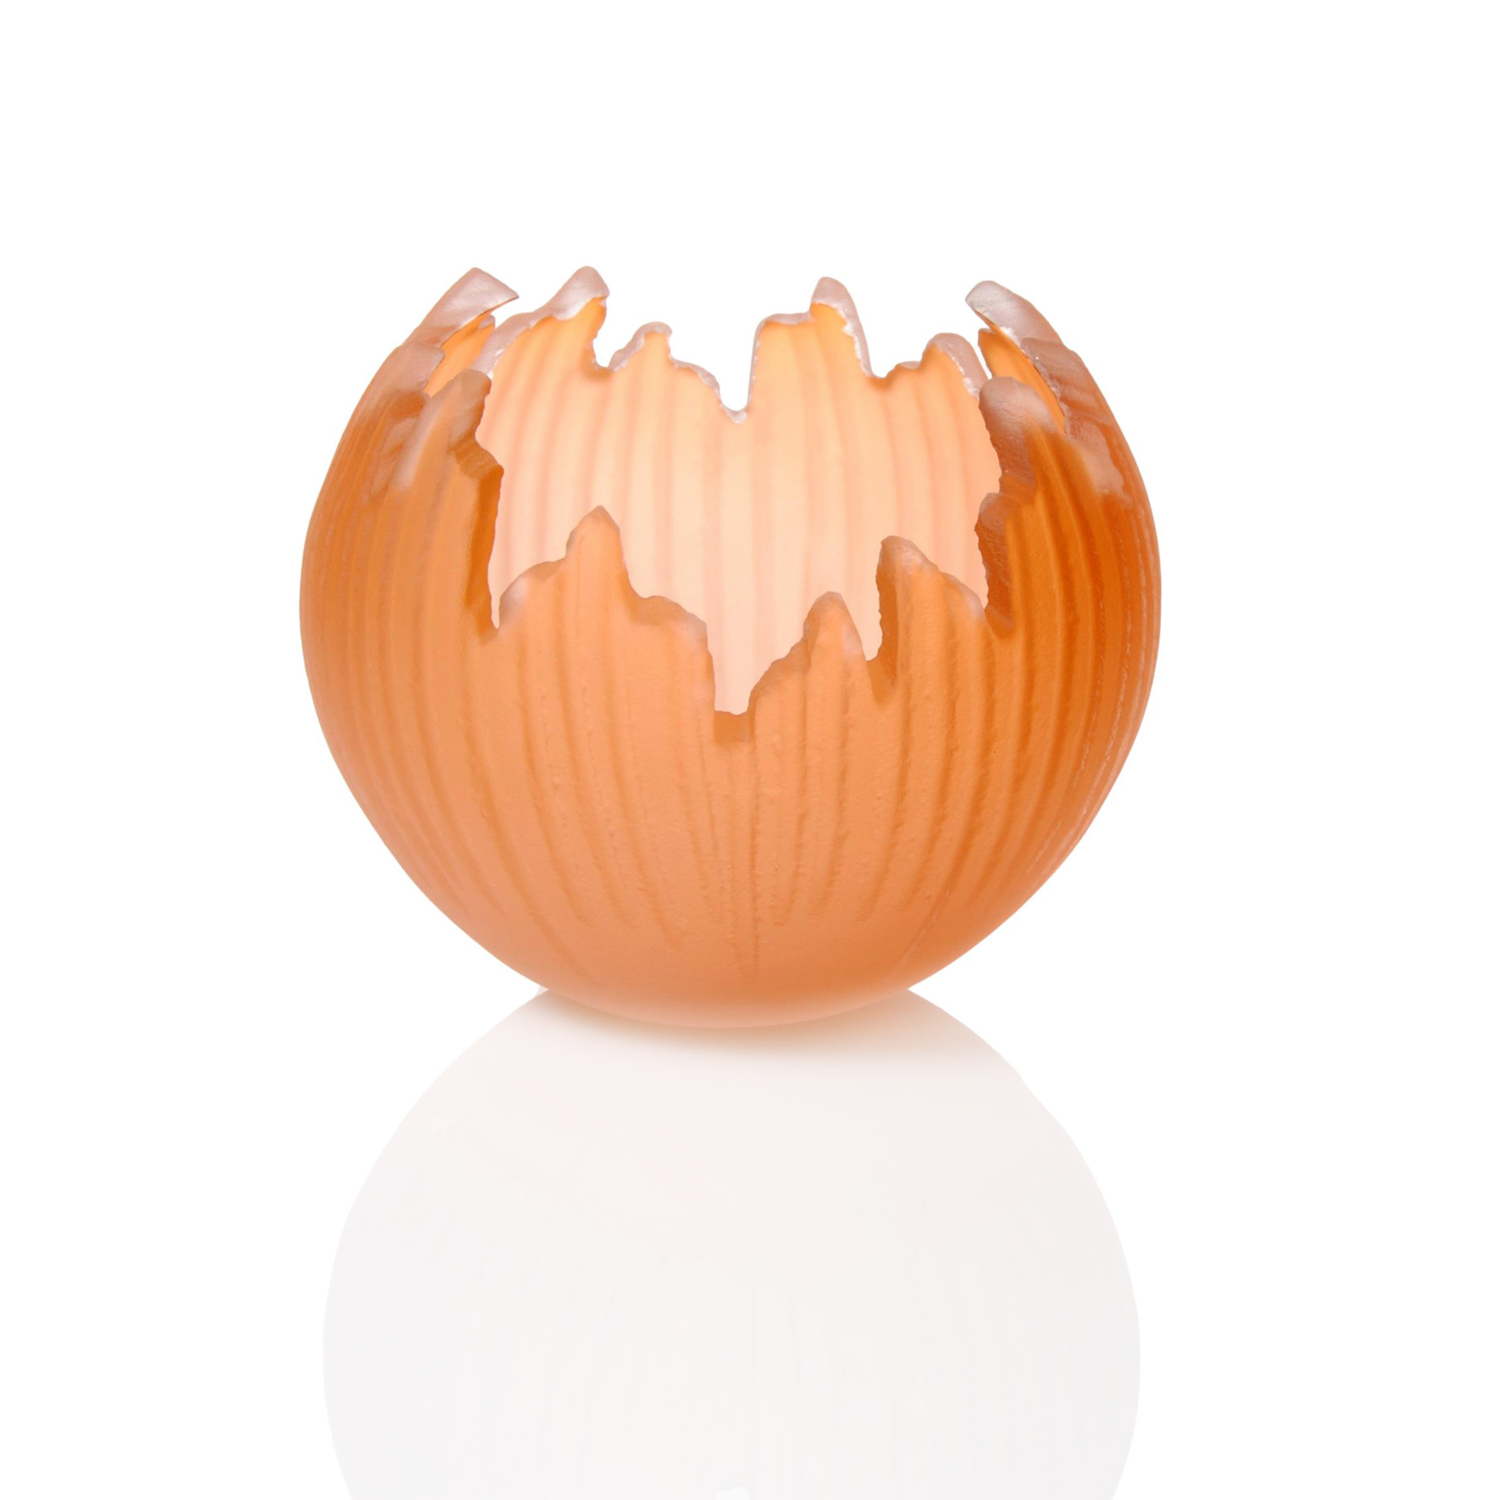 Courtney Downman: Orange Saw Carved Glass Votive Product Image 1 of 1